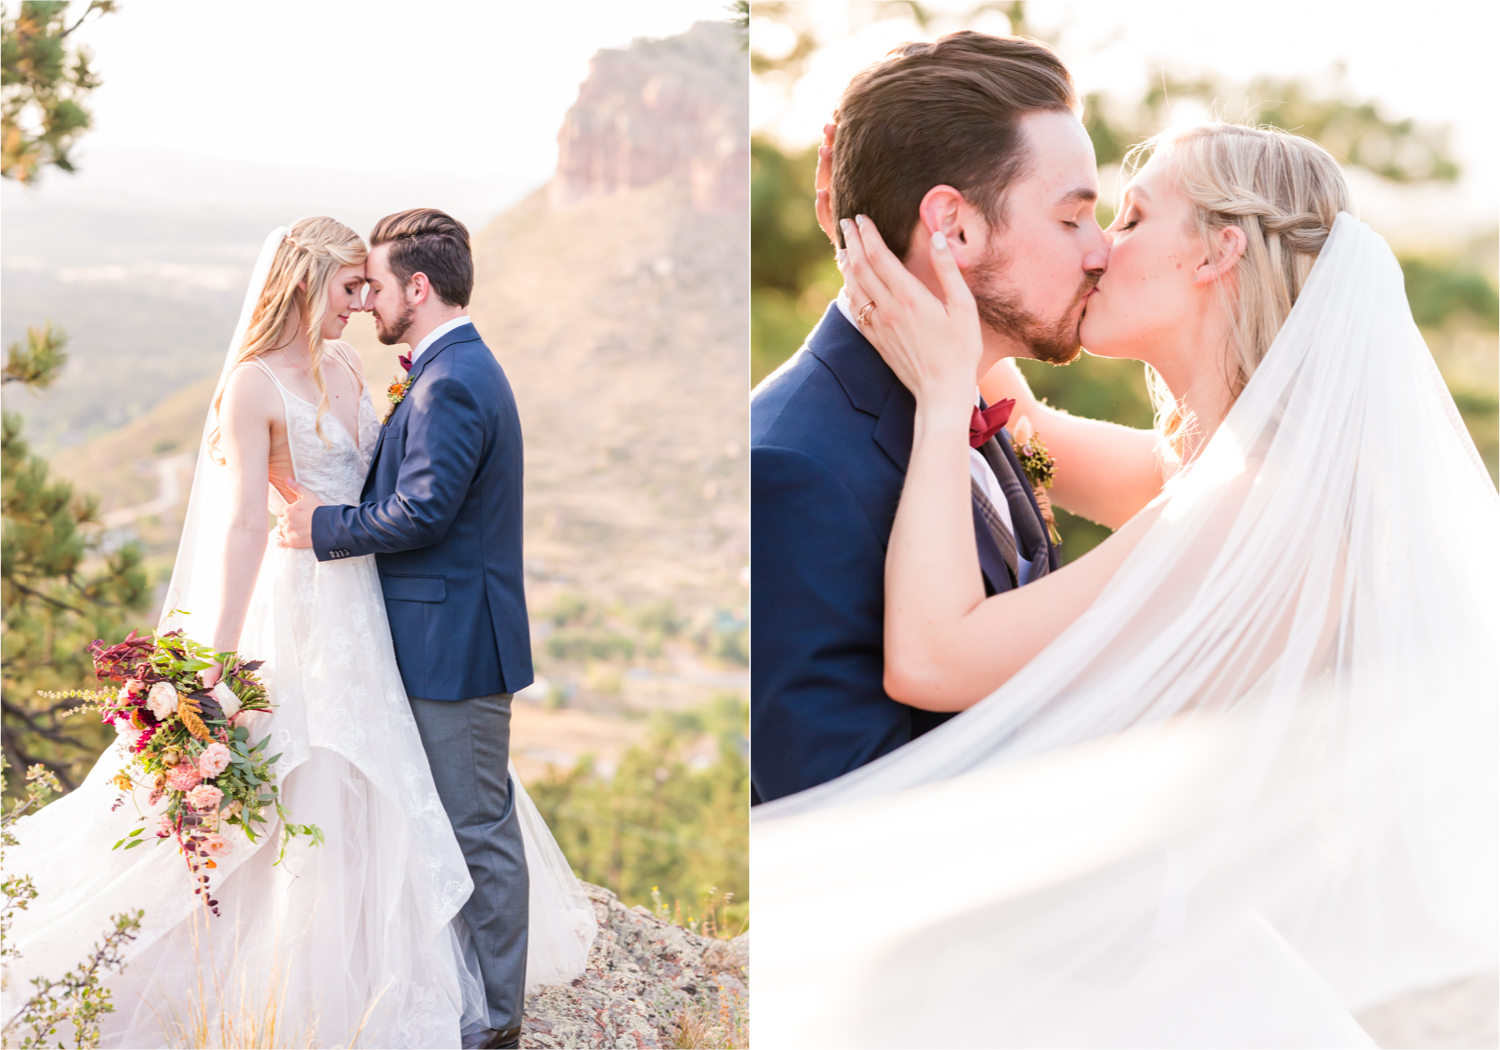 Romantic Whimsical Wedding at the Lionscrest Manor in Lyons, CO | Britni Girard Photography - Wedding Photo and Video Team | Rustic Fall Decor mixed in Burgundy, Blush, Gold and Sage | Groom in Custom Suit from Jos. a Banks | Romantic Bride and Groom Portraits in the rocky mountains | Wedding Dress from Anna Be Bridal by Hailey Paige | Hair and Makeup by Glam 5280 Chaundra Revier | Florals by Aflorae | Fine Art Wedding Photography